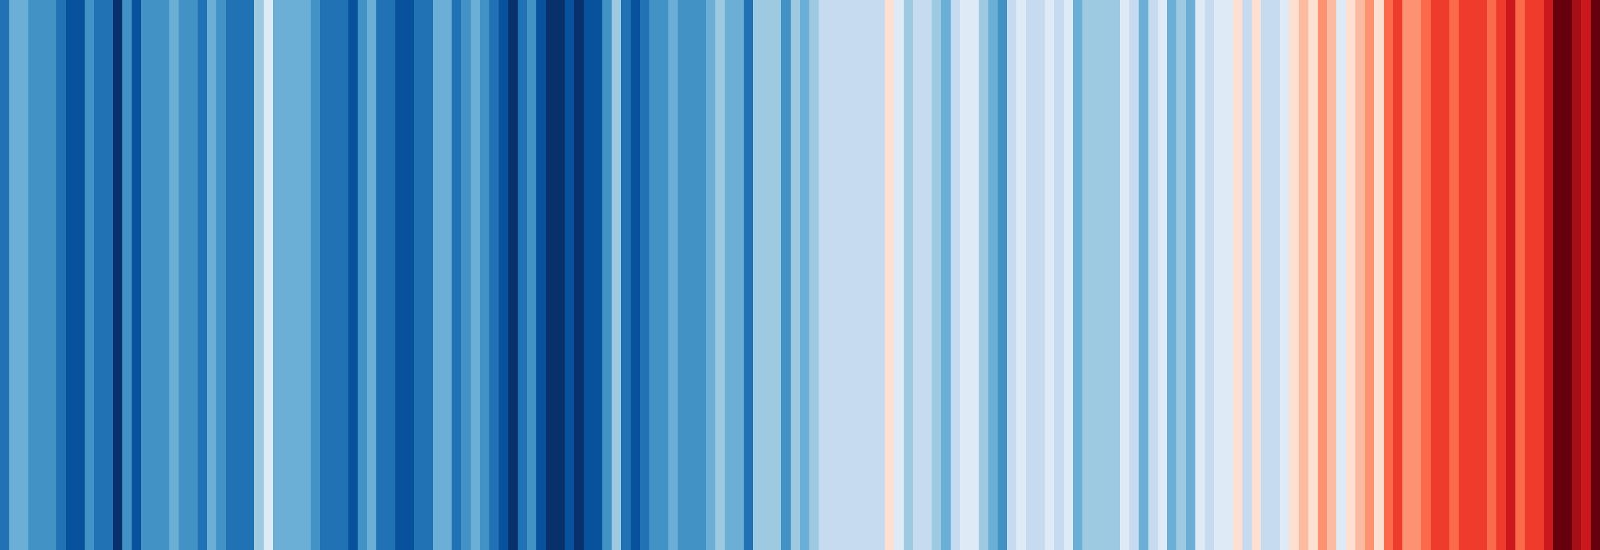 The climate stripes, created by Ed Hawkins to represent the Earth's warming